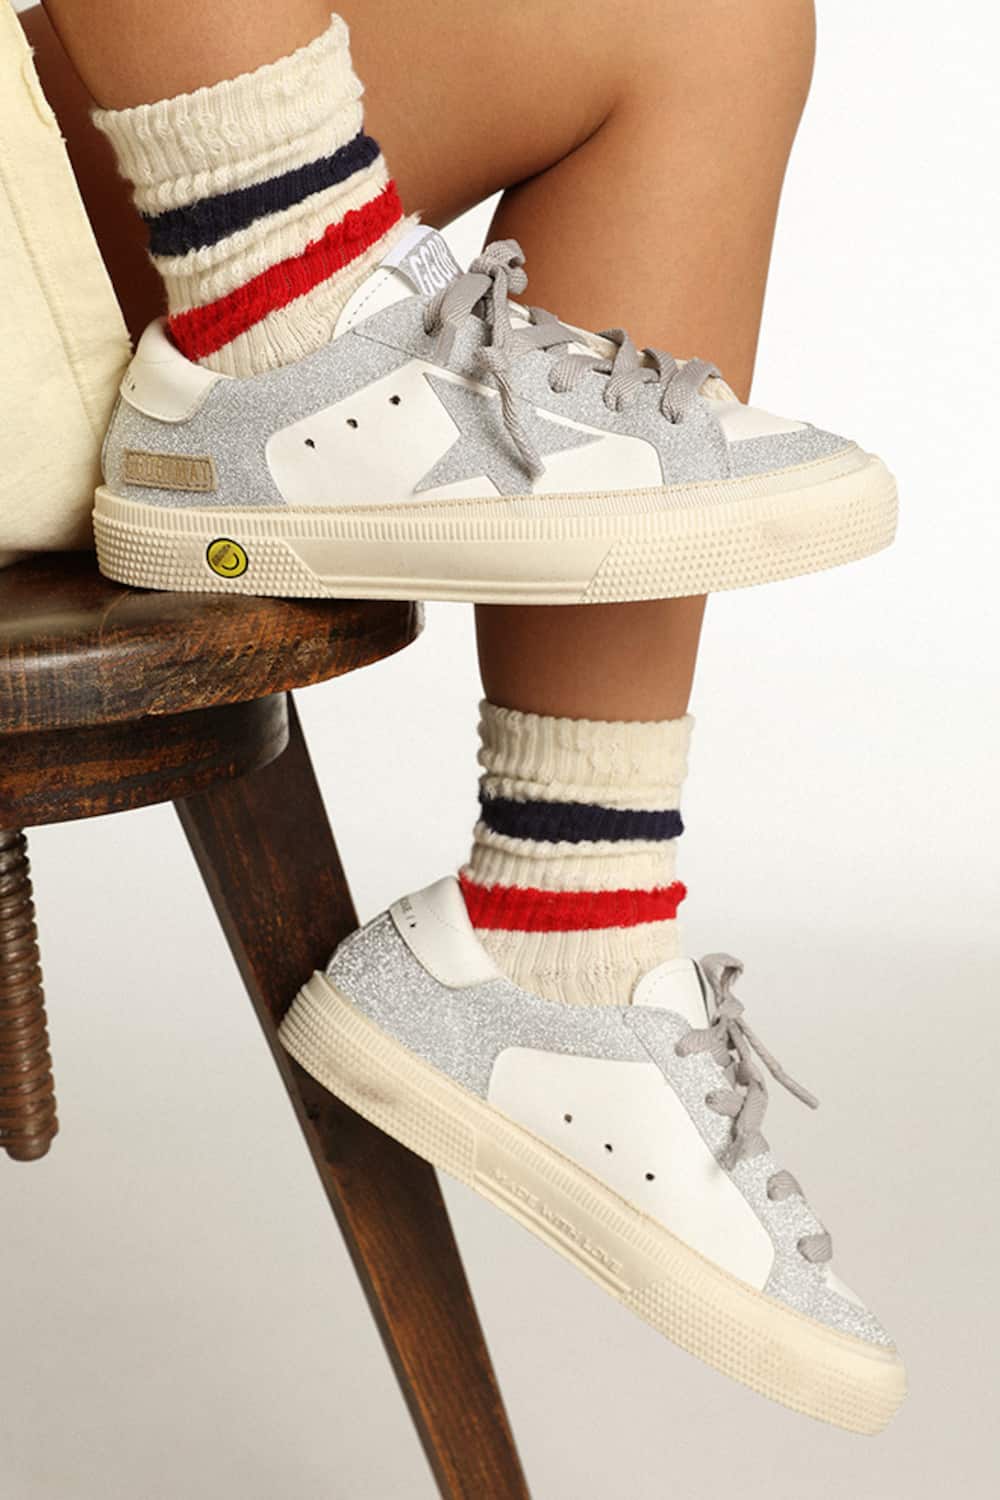 Golden Goose - Young May in white leather and silver glitter in 